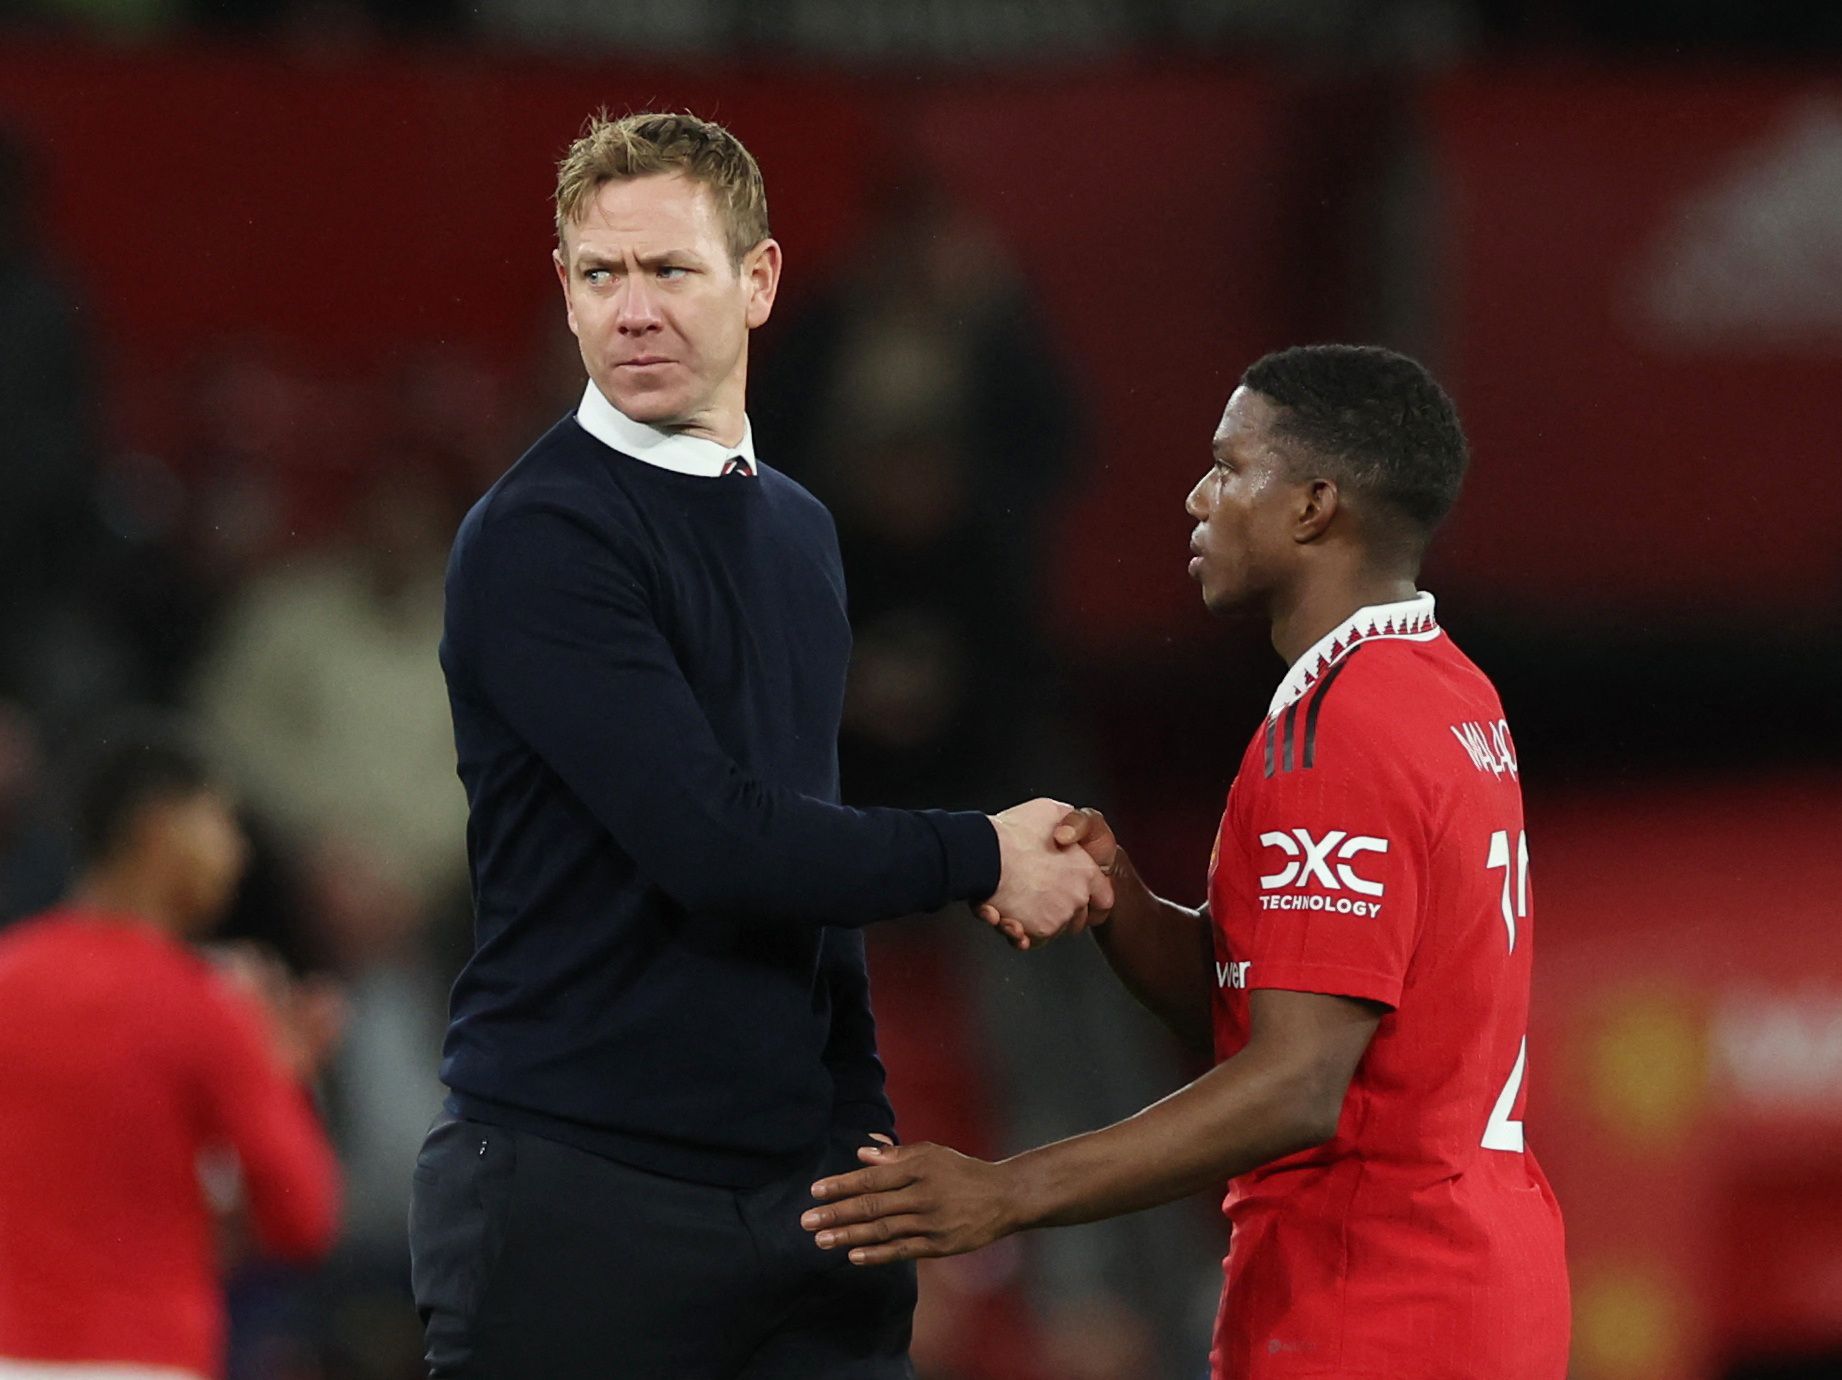 Soccer Football - Carabao Cup - Quarter Final - Manchester United v Charlton Athletic - Old Trafford, Manchester, Britain - January 10, 2023 Manchester United's Tyrell Malacia shakes hands with Charlton Athletic manager Dean Holden after the match REUTERS/Phil Noble EDITORIAL USE ONLY. No use with unauthorized audio, video, data, fixture lists, club/league logos or 'live' services. Online in-match use limited to 75 images, no video emulation. No use in betting, games or single club /league/playe